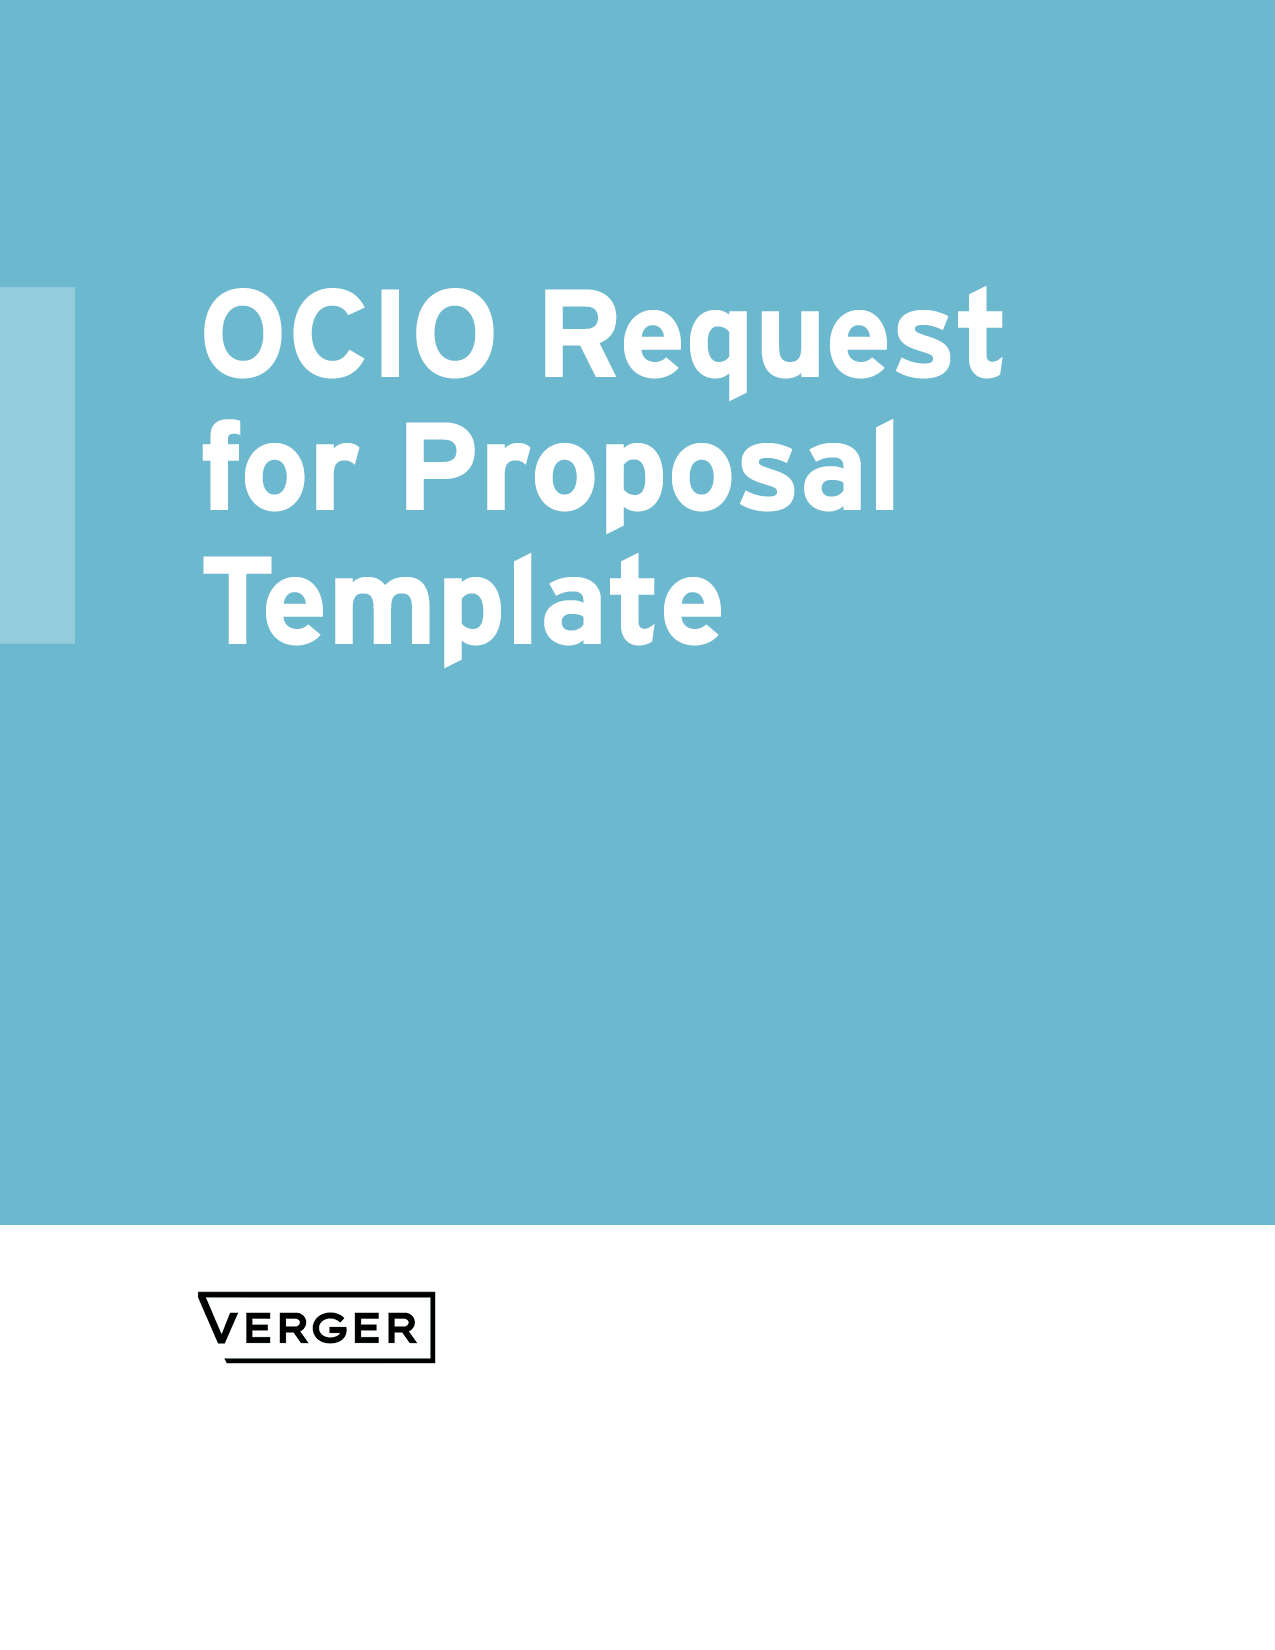 OCIO-request-for-proposal-template